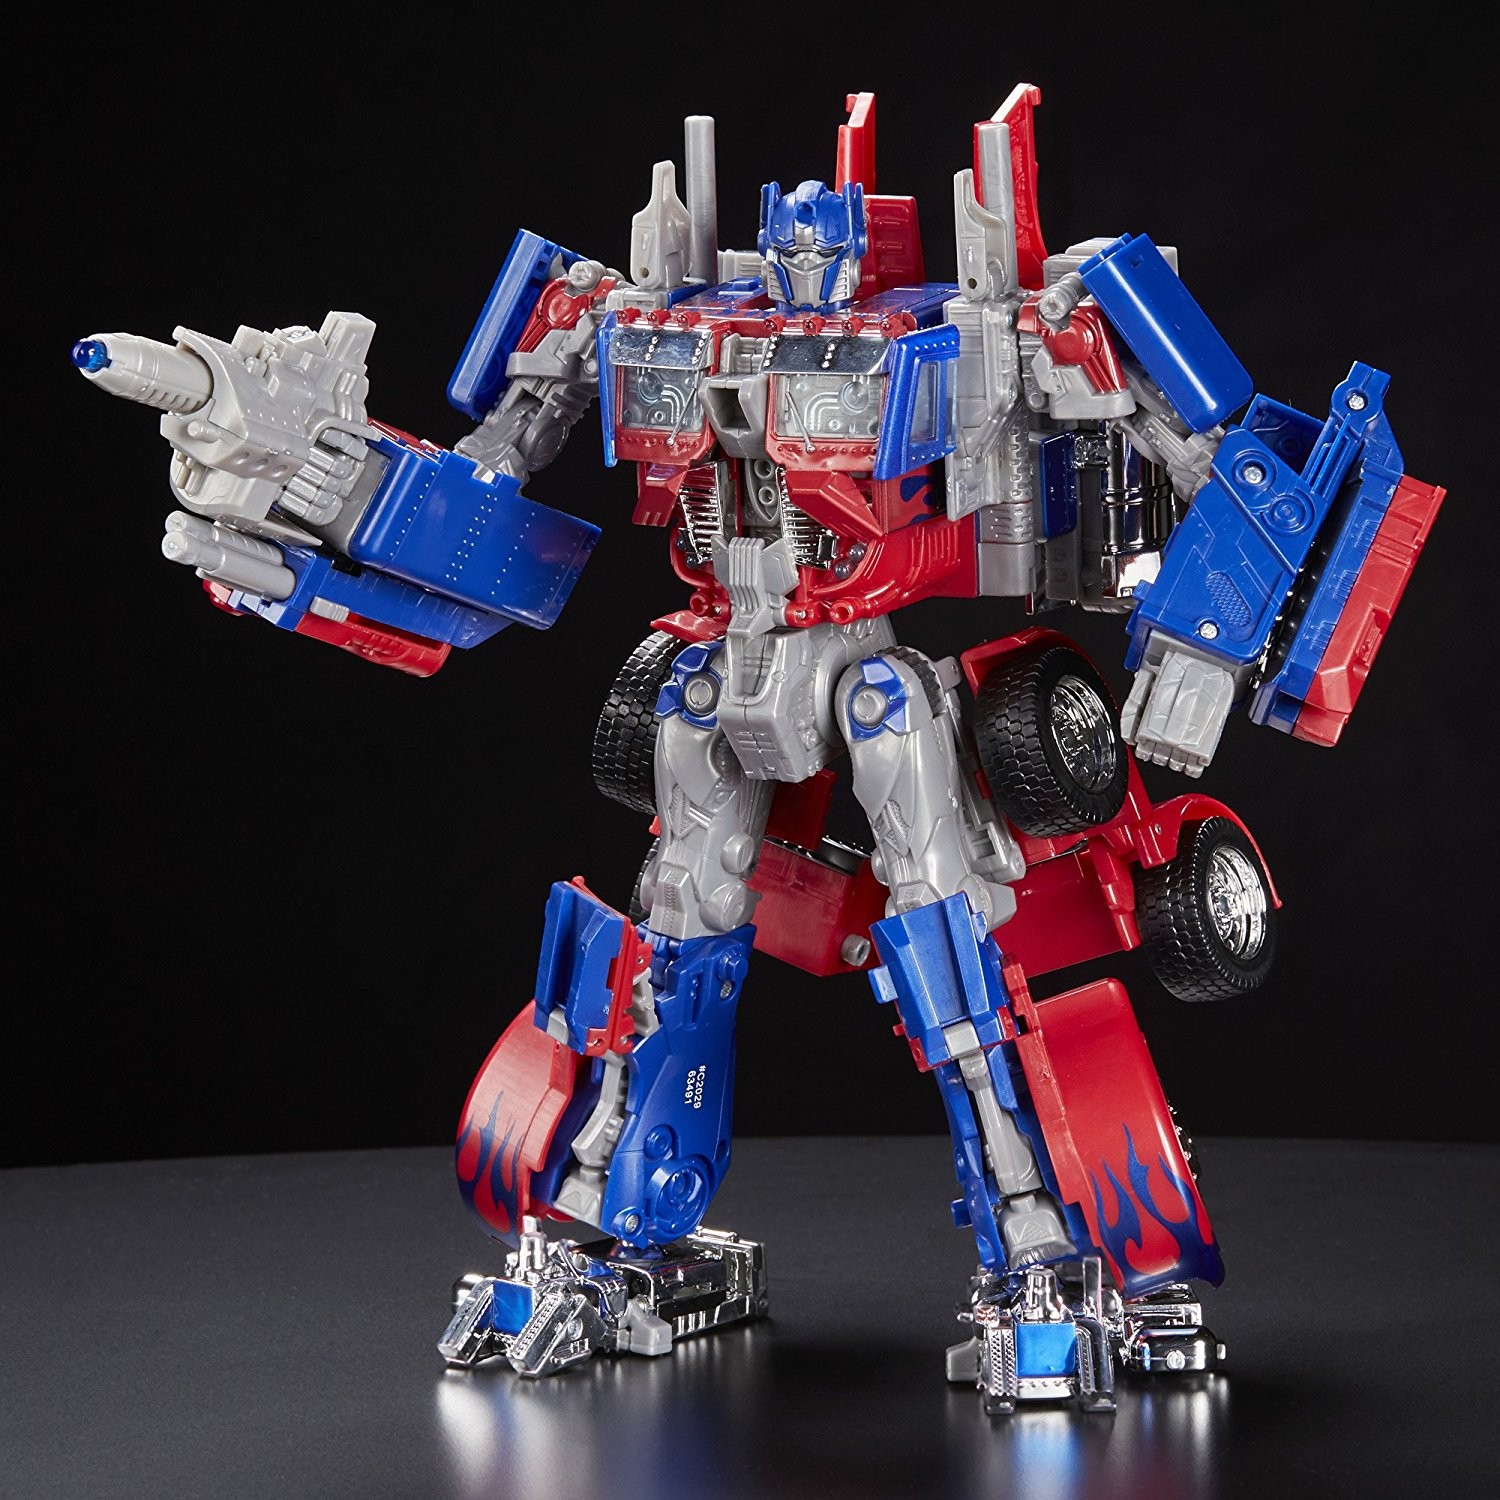 Transformers News: Transformers Tribute Movie 1 Leader Optimus Prime Now for Sale on Amazon for $80